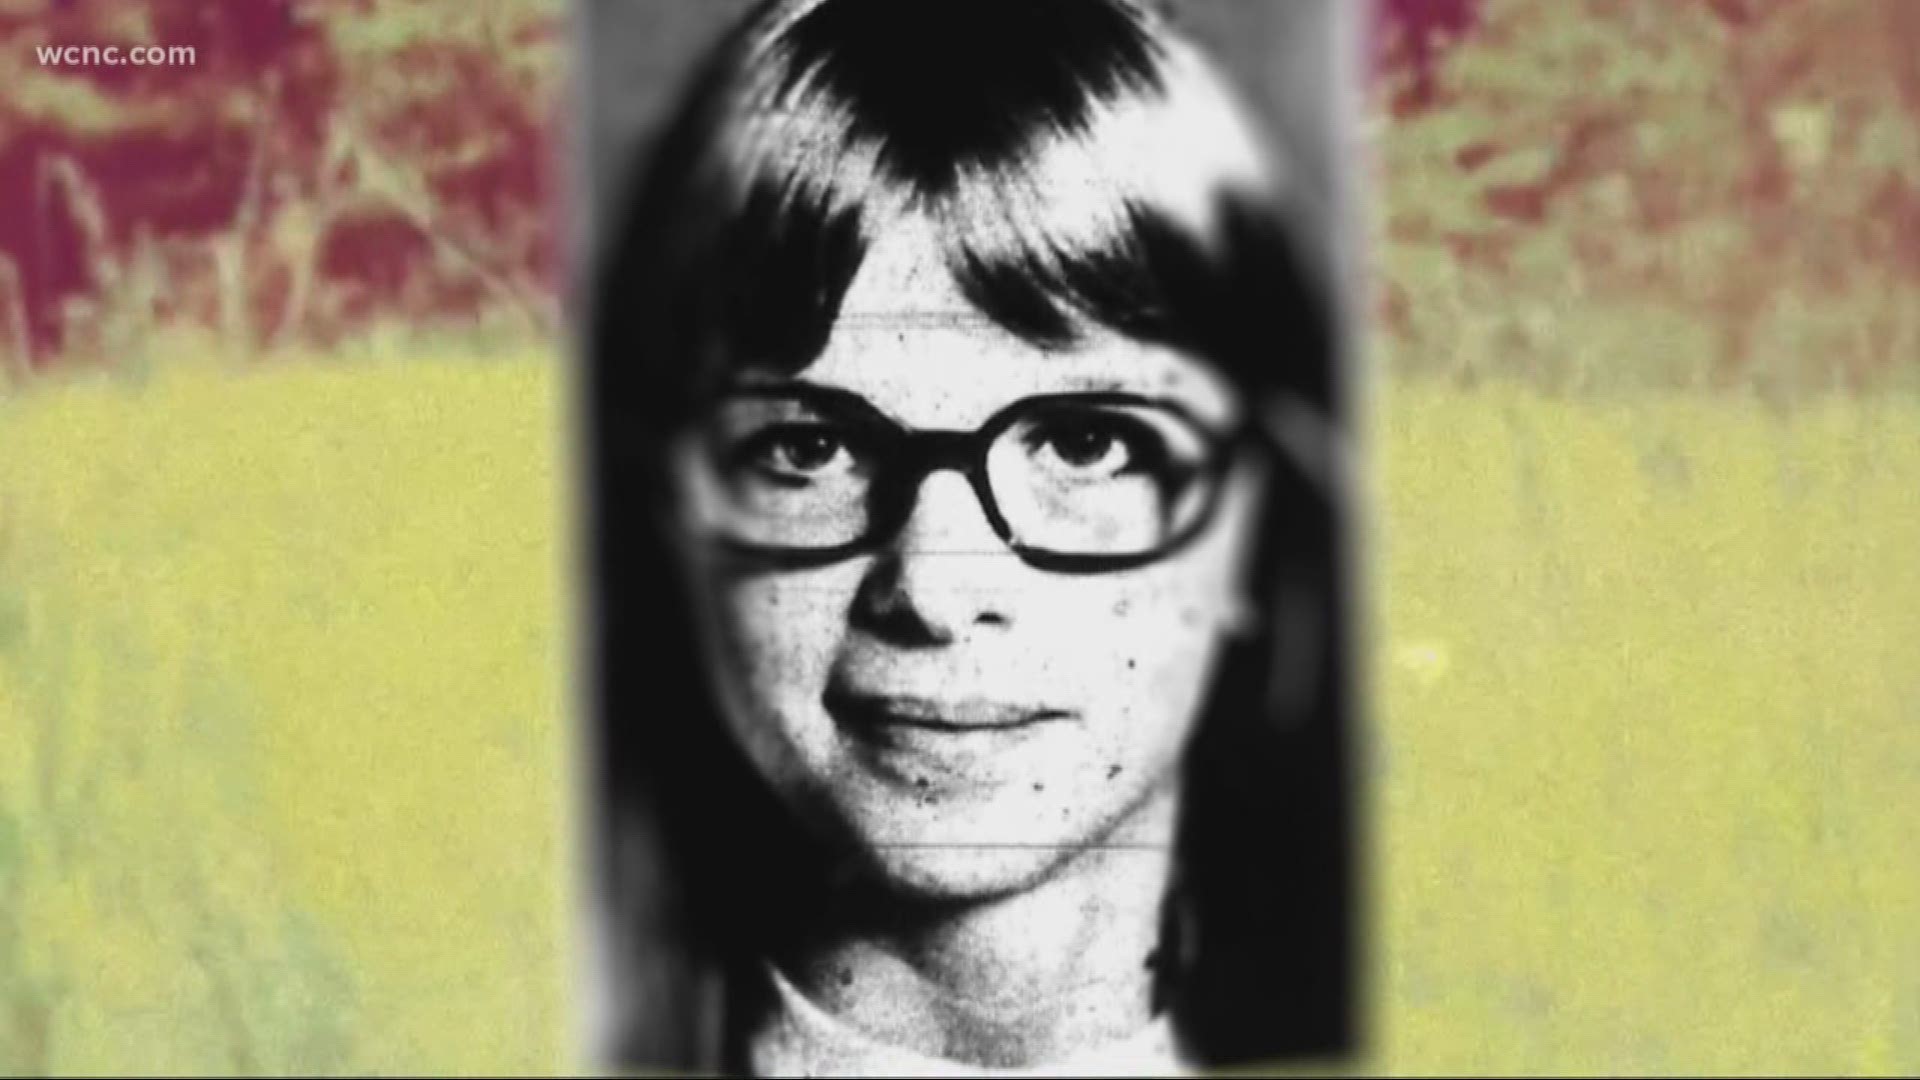 It's been more than four decades since the teen vanished from her Charlotte area front yard on a hot summer day, only her flip flops left behind.